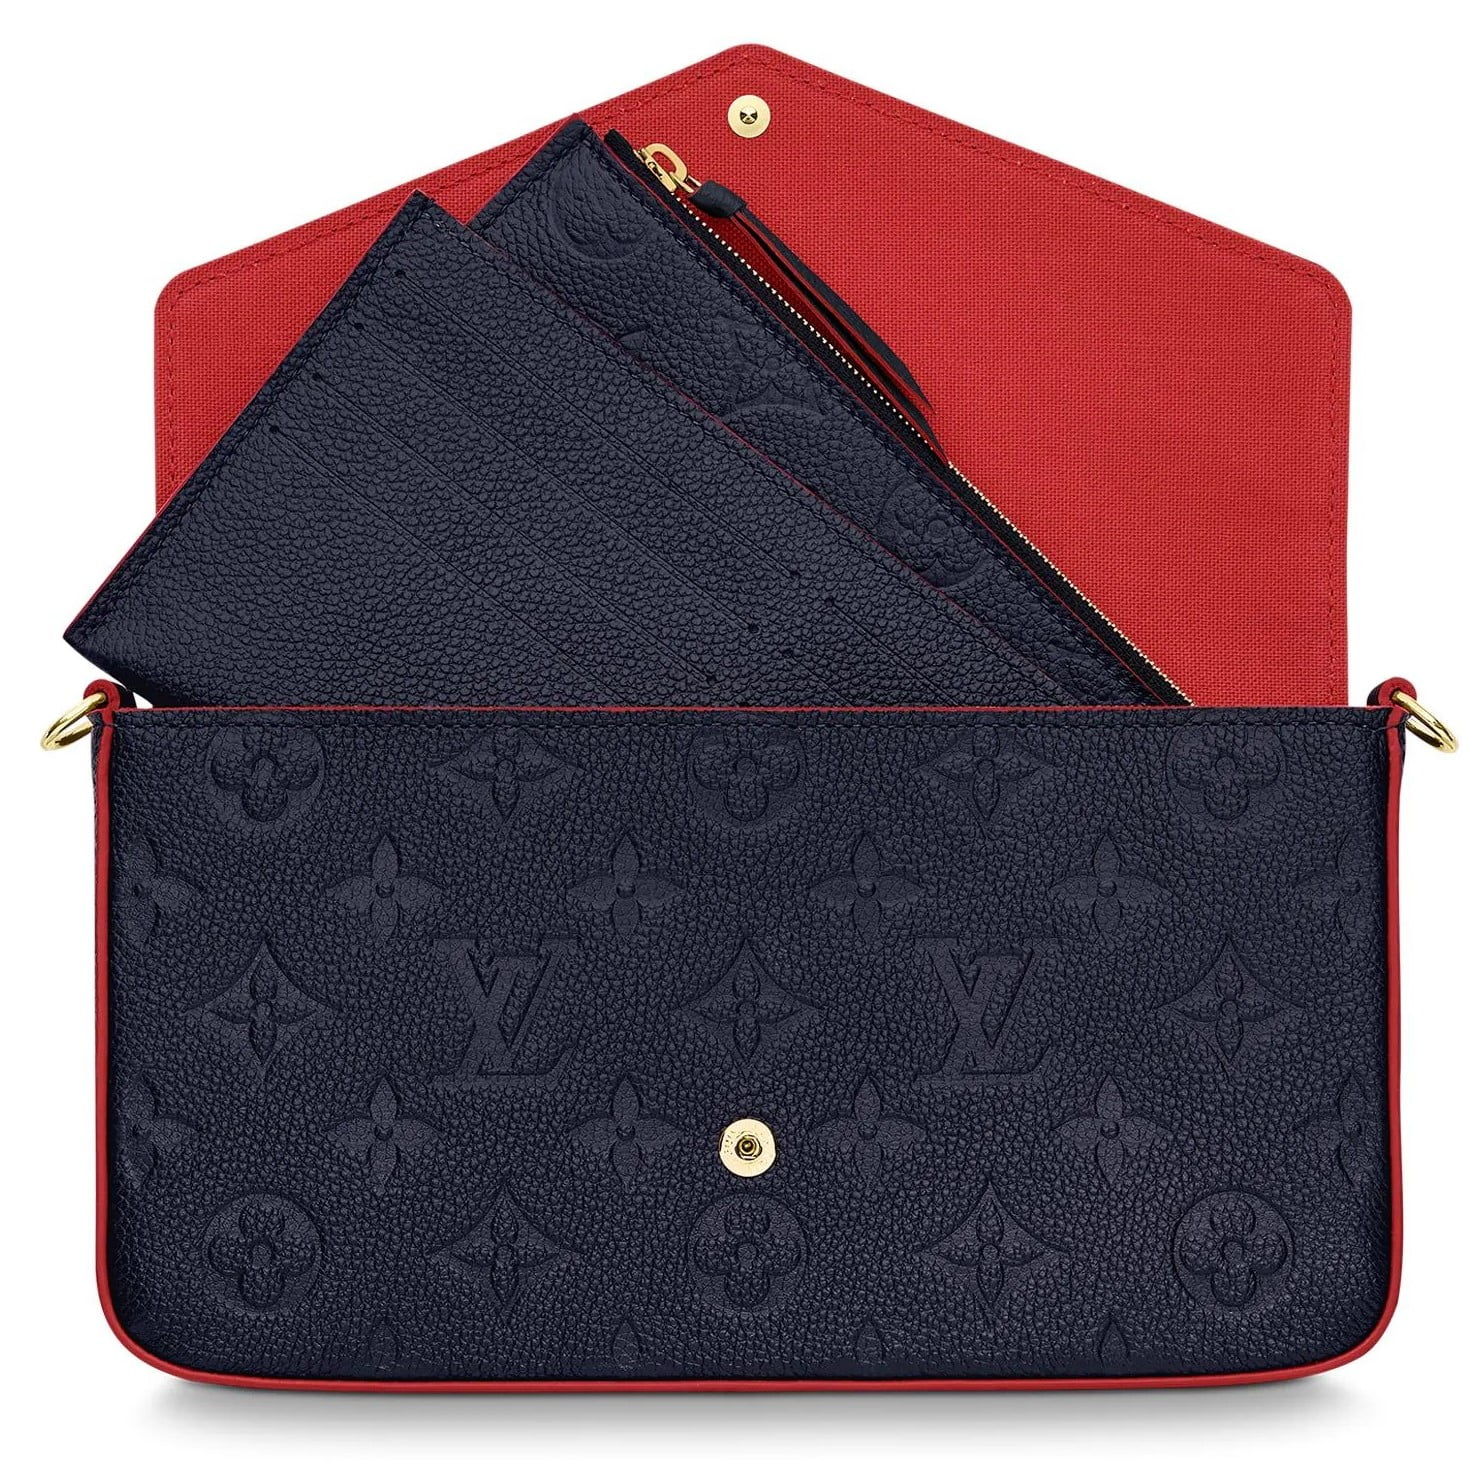 TÚI ĐEO CHÉO NỮ LV LOUIS VUITTON FÉLICIE POCHETTE MARINE ROUGE MONOGRAM EMPREINTE LEATHER WALLETS AND SMALL LEATHER GOODS M64099 12